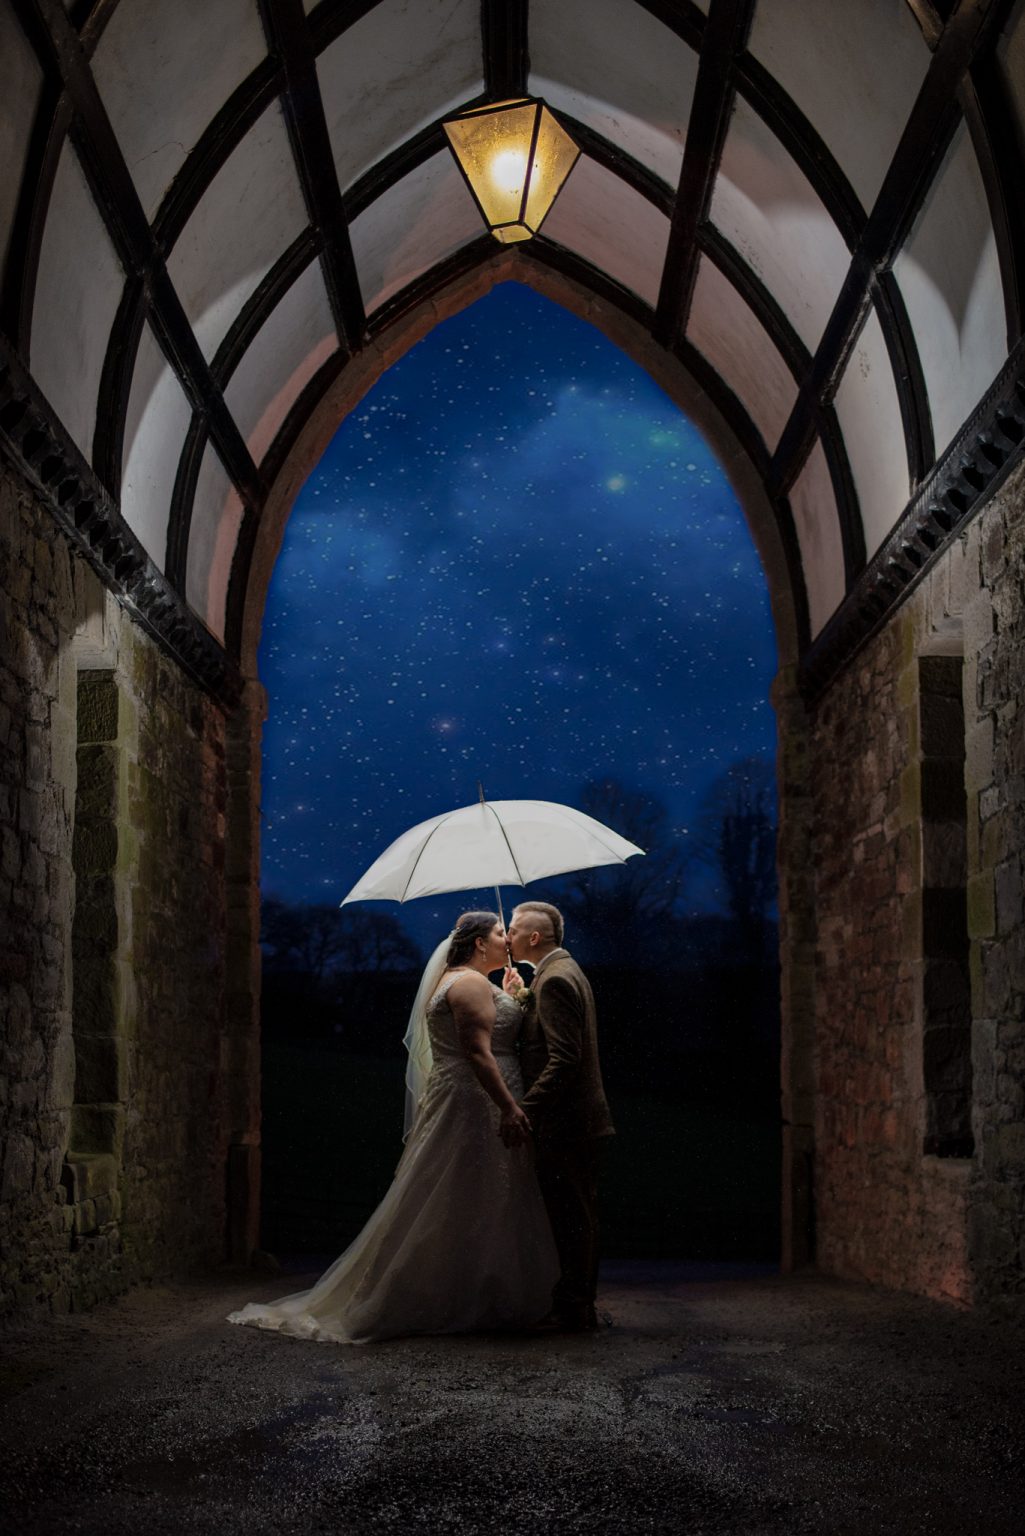 Under the arch shot at Clearwell castle. A flash lights up the archway in the dar as a couple kiss under a white umbrella. Cotswold wedding photography by Pedge Photography